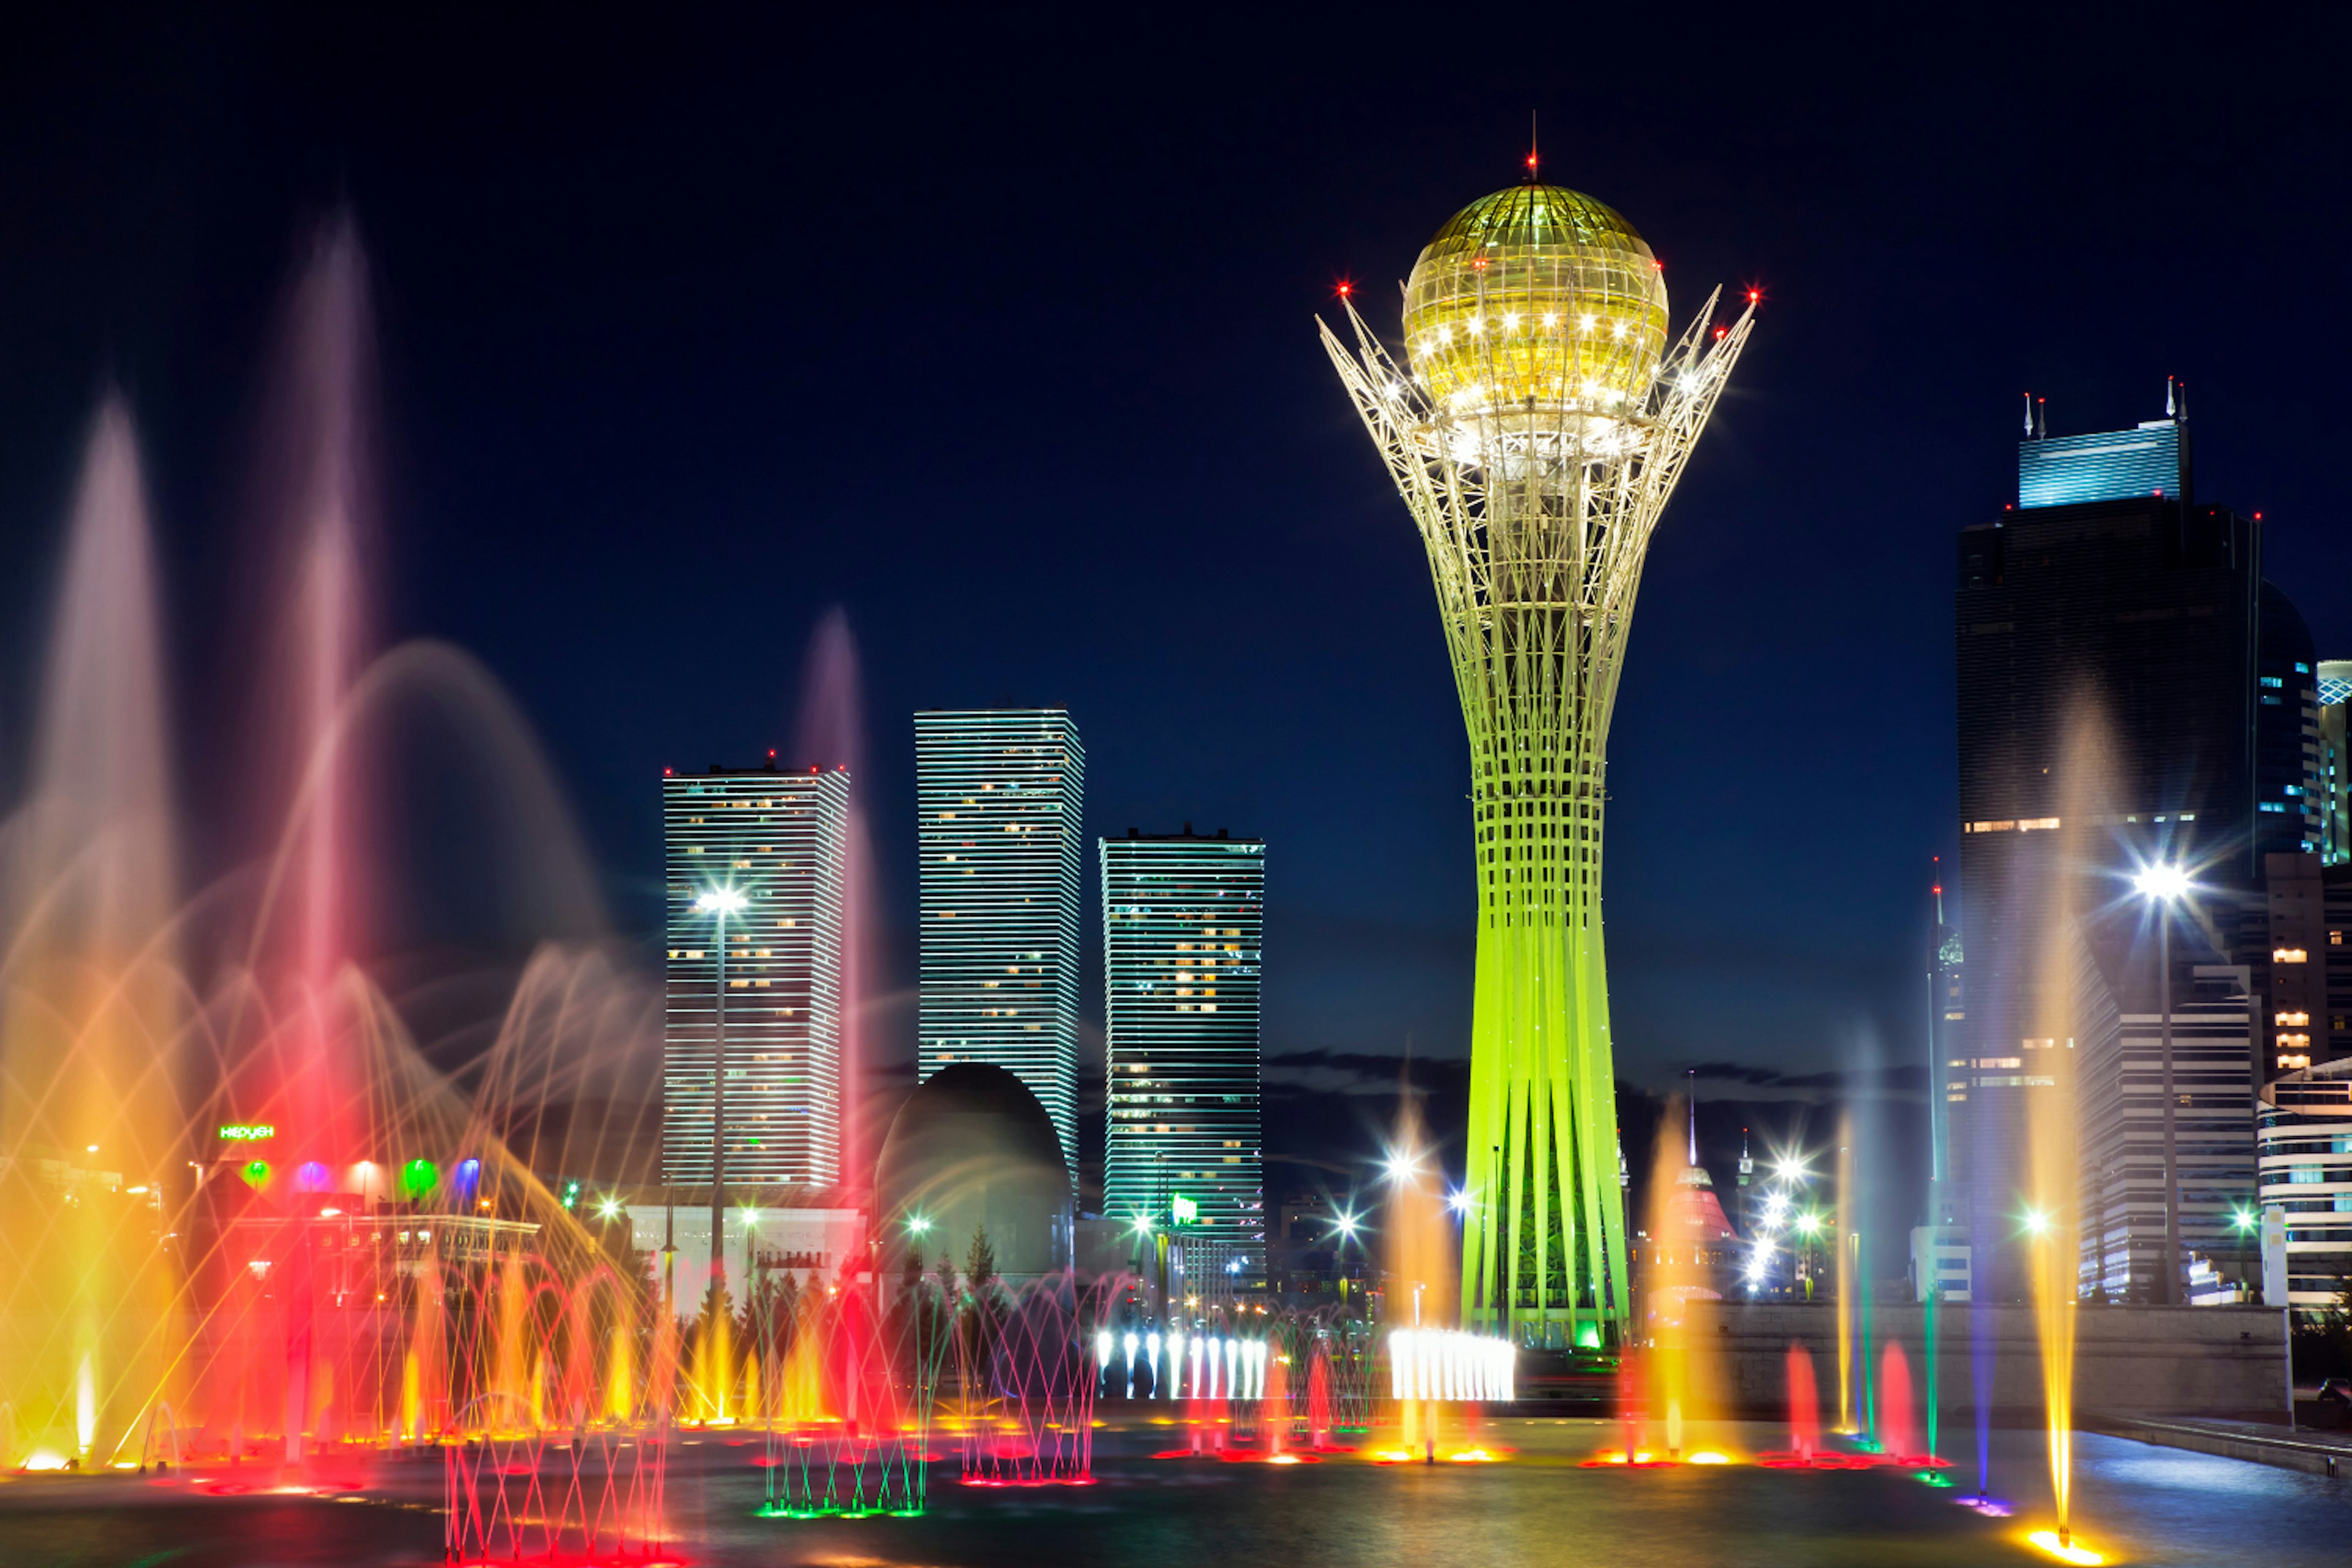 Astana's futuristic skyline is most beautiful when lit up at night. Image by Rush Eastham & Max Paoli / Getty